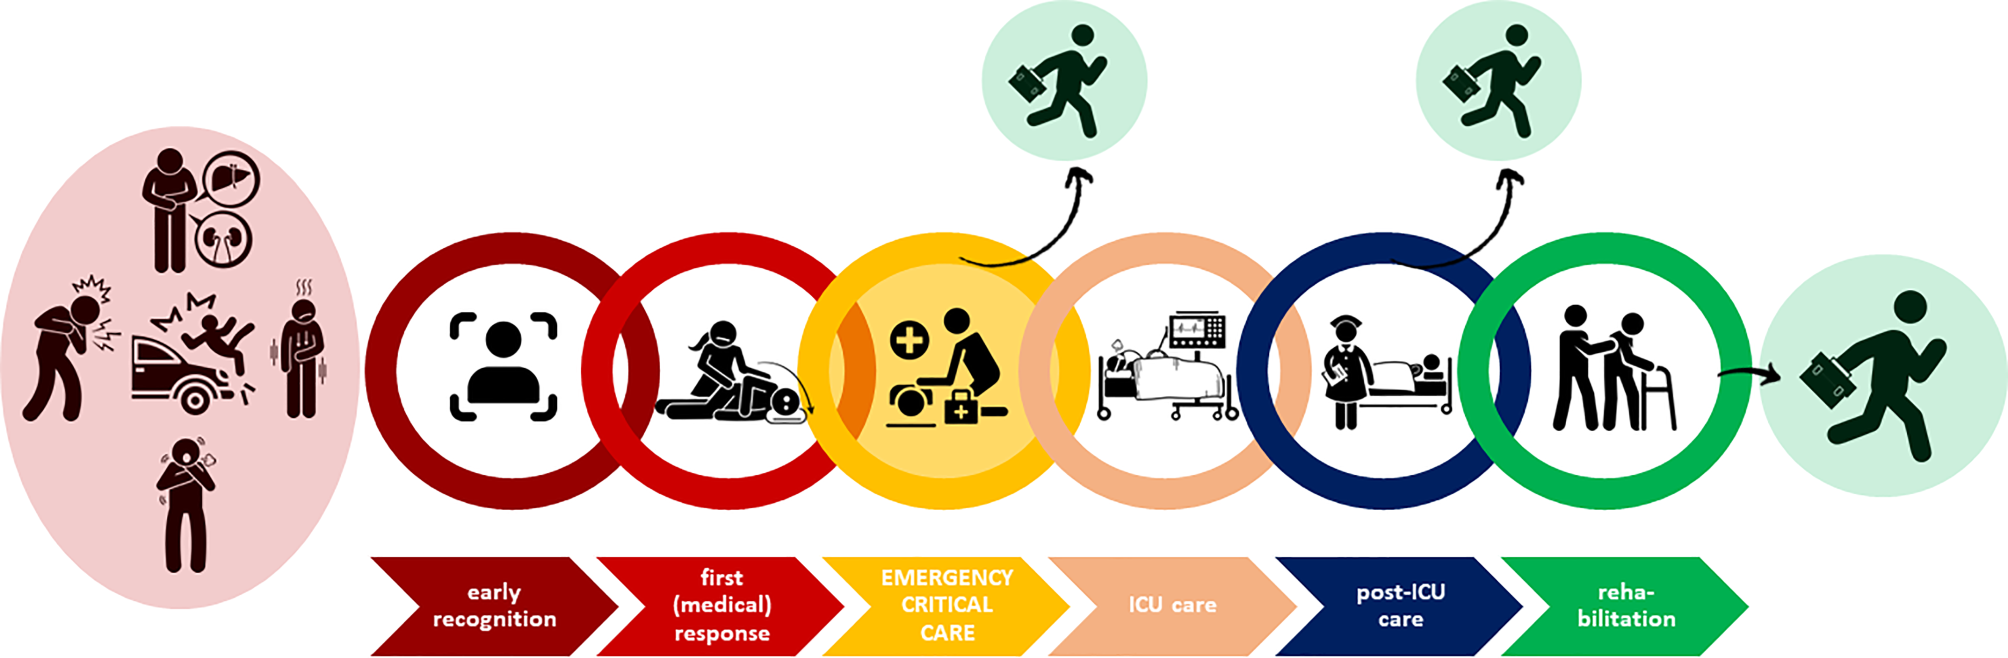 Emergency critical care: closing the gap between onset of critical illness and intensive care unit admission